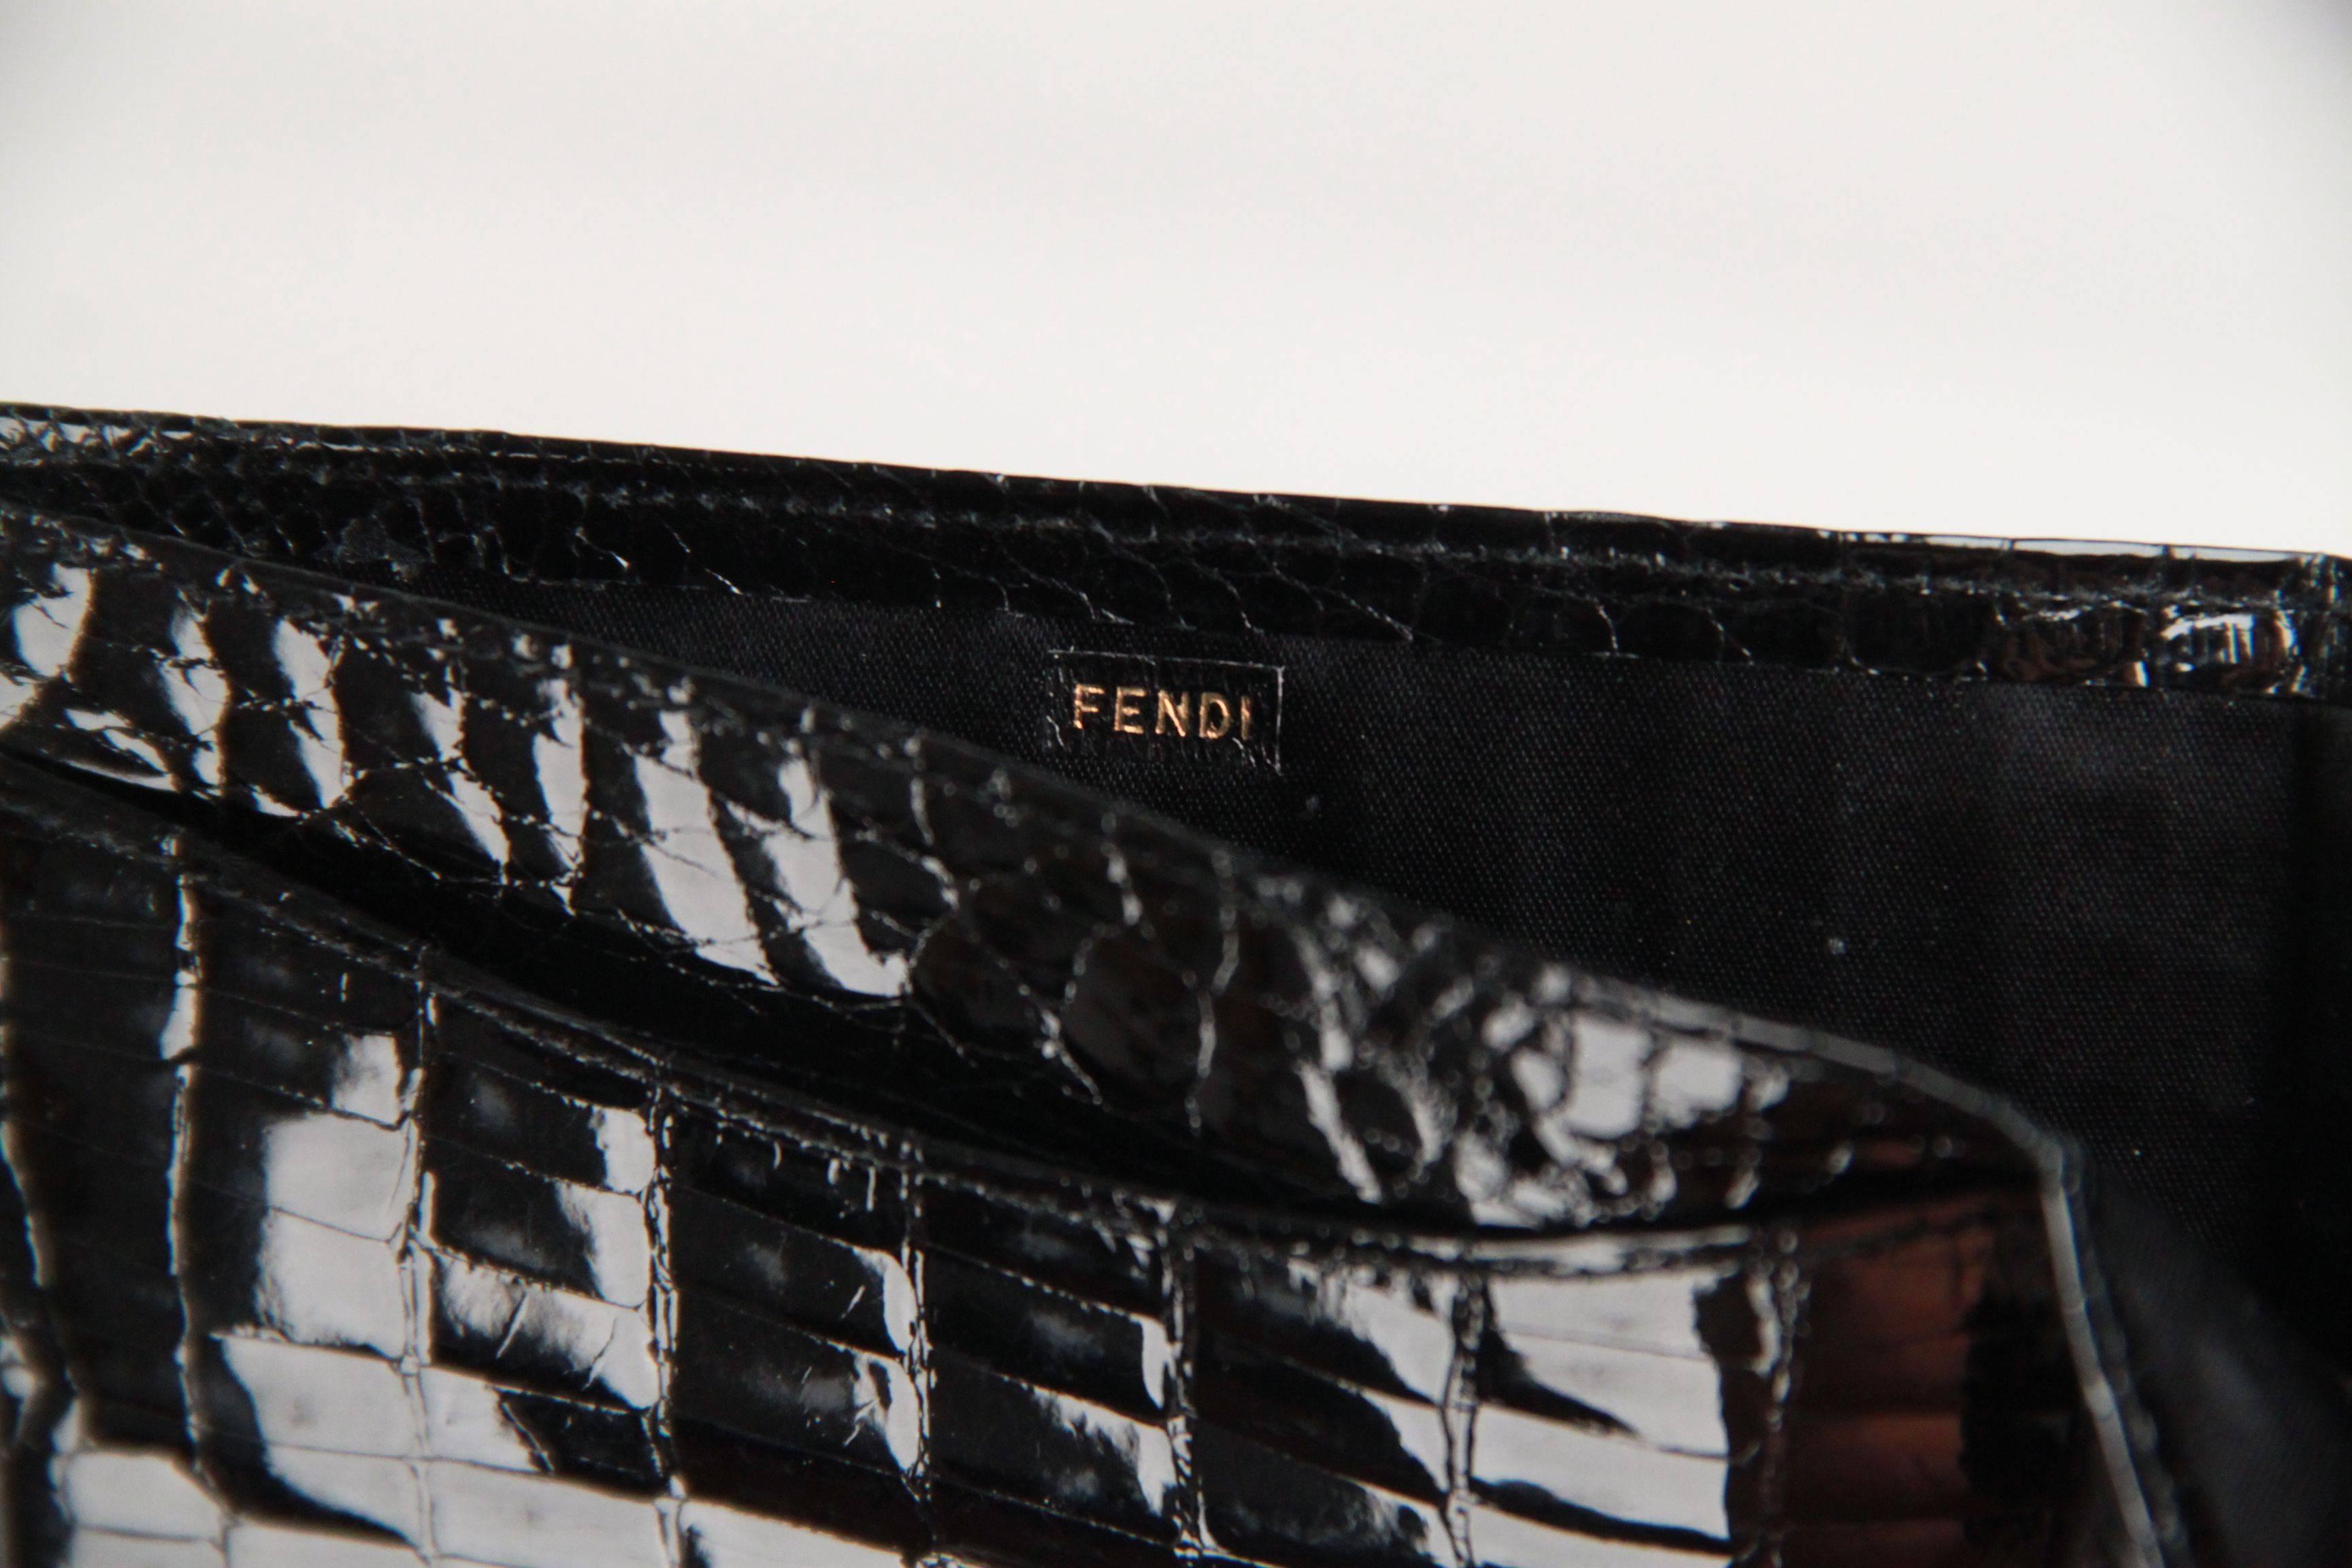 - FENDI - Made in Italy
- Black crocodile leather
- Gold plaque on the front for incision
- Bifold design
- 1 bill compartment
- 3 open pocket
- Measurements (HxL): 3 1/4 x 4 1/4 inches - 8,2 x 10,7 cm

Logos / Tags: 'FENDI' embossed internally